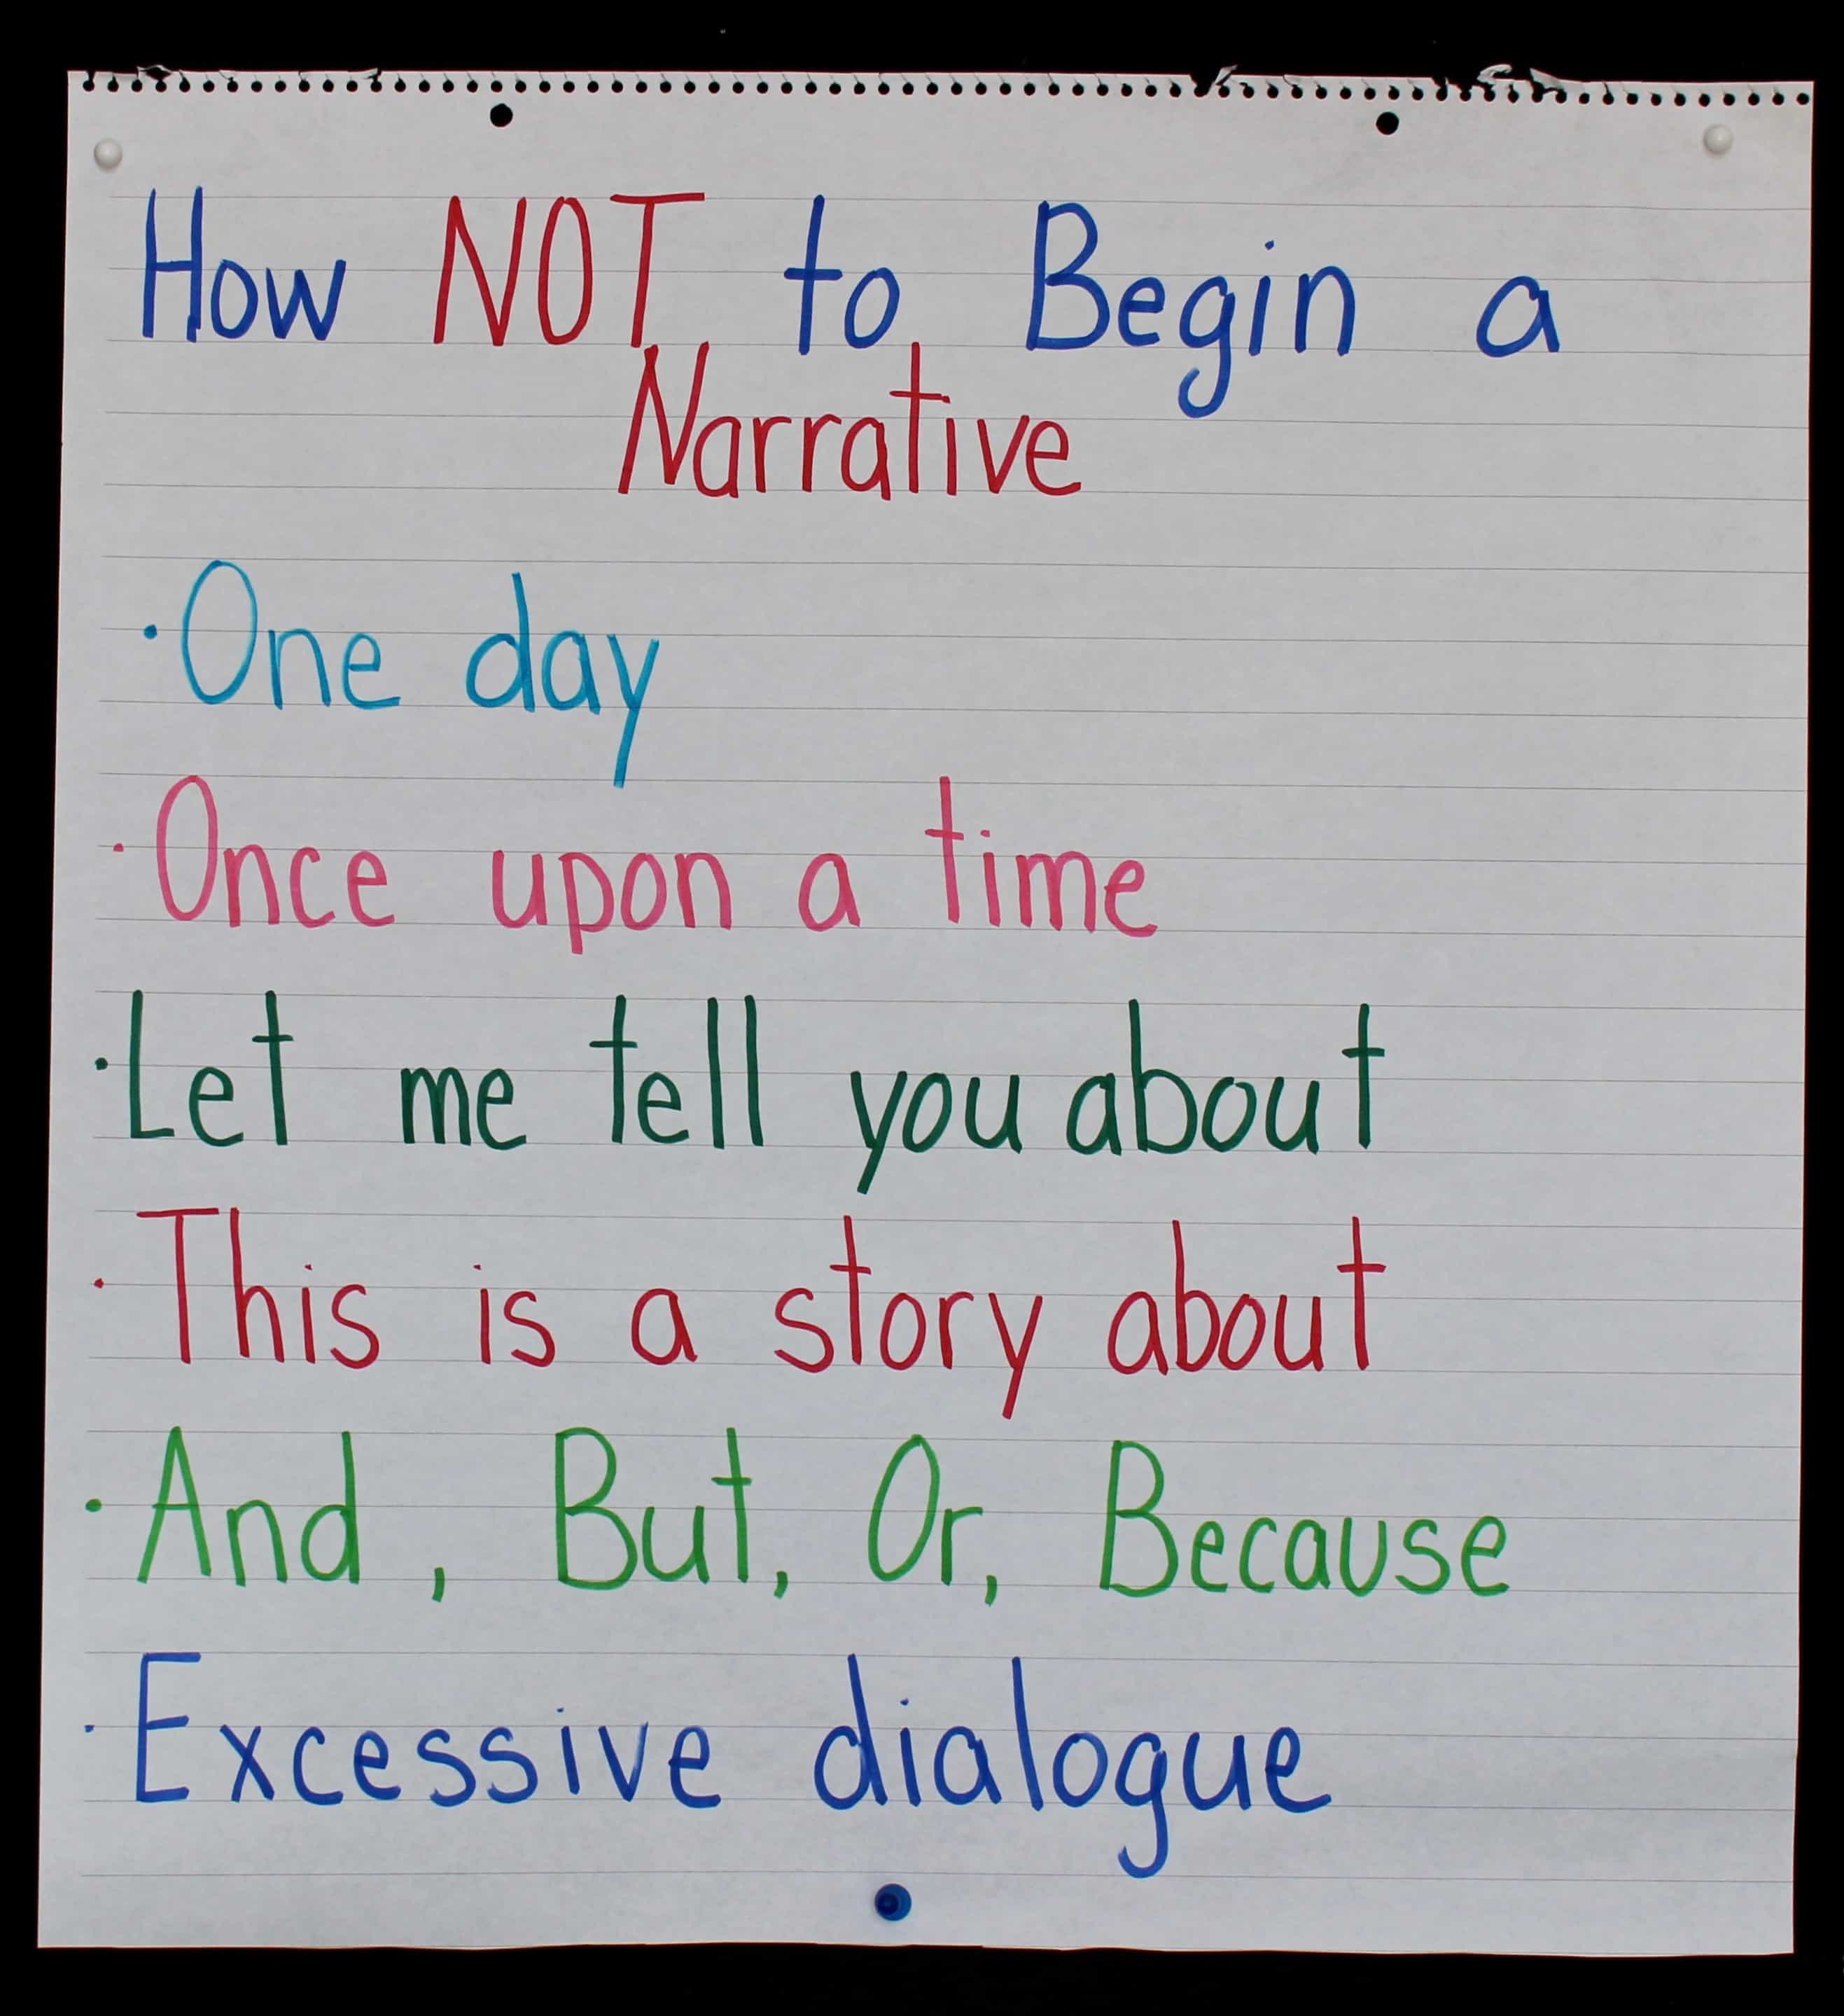 Teaching narrative writing to upper elementary students can be SO much fun! But, as we know, there are a lot of pieces to narrative writing, and it's a lot to teach. This blog post shares tons of tips, mentor texts, activities, and resources for teaching narratives in 3rd grade, 4th grade, and 5th grade. Click through to read the post!